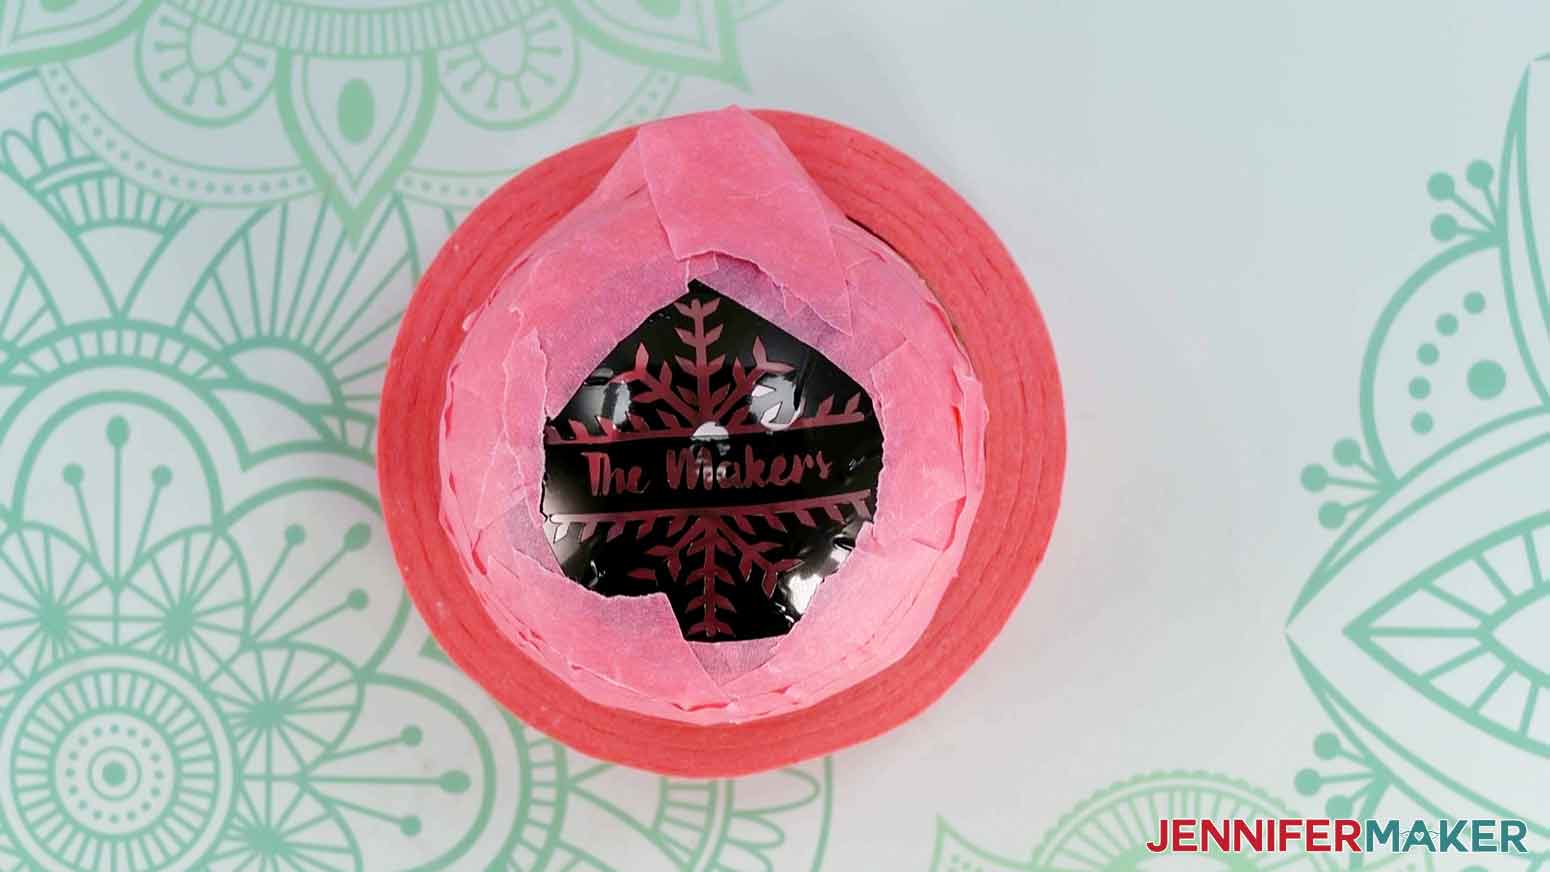 The etched glass ornament snowflake design stencil applied to the front of an ornament with the remaining parts of the ornament covered in pink painter's tape